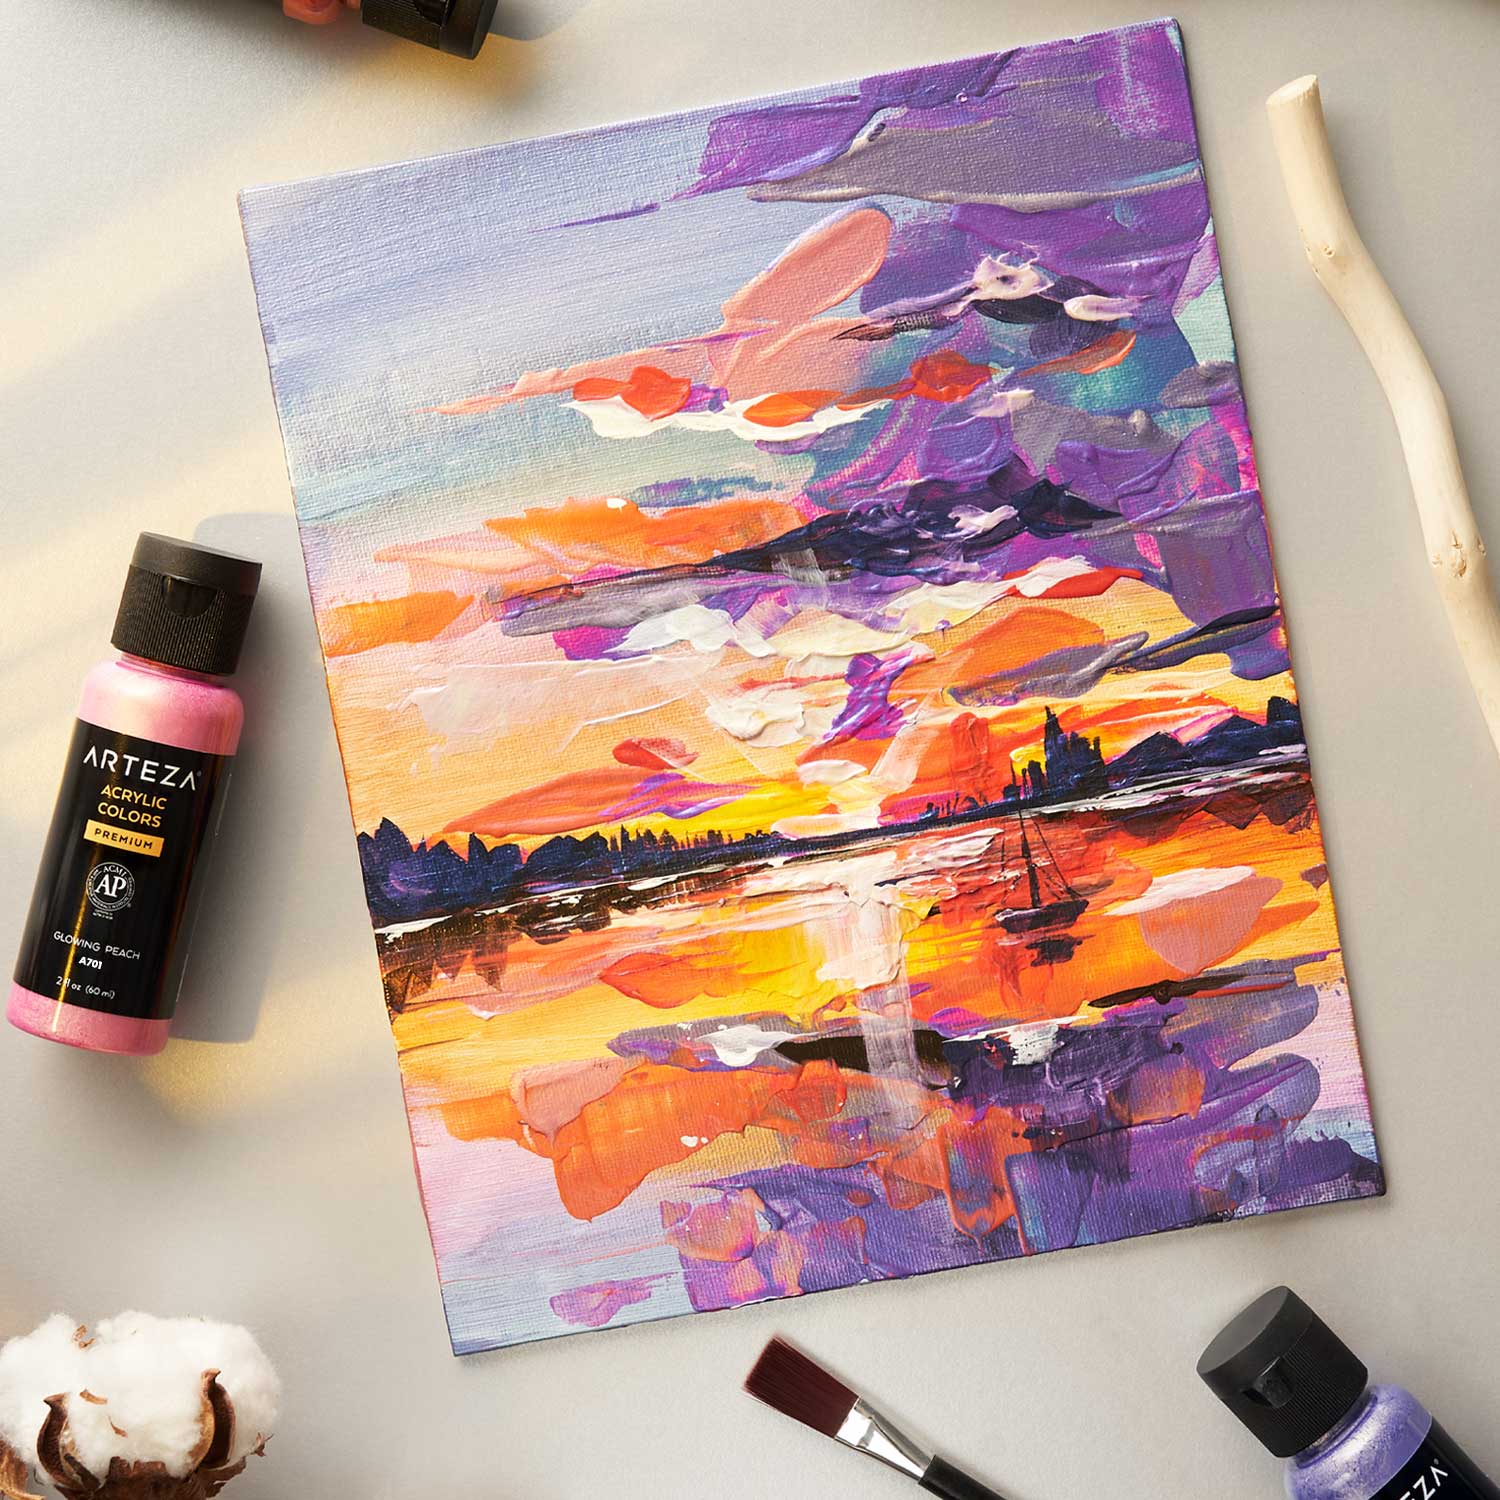 7 Art Products And Hacks That Rate 10 out of 10 